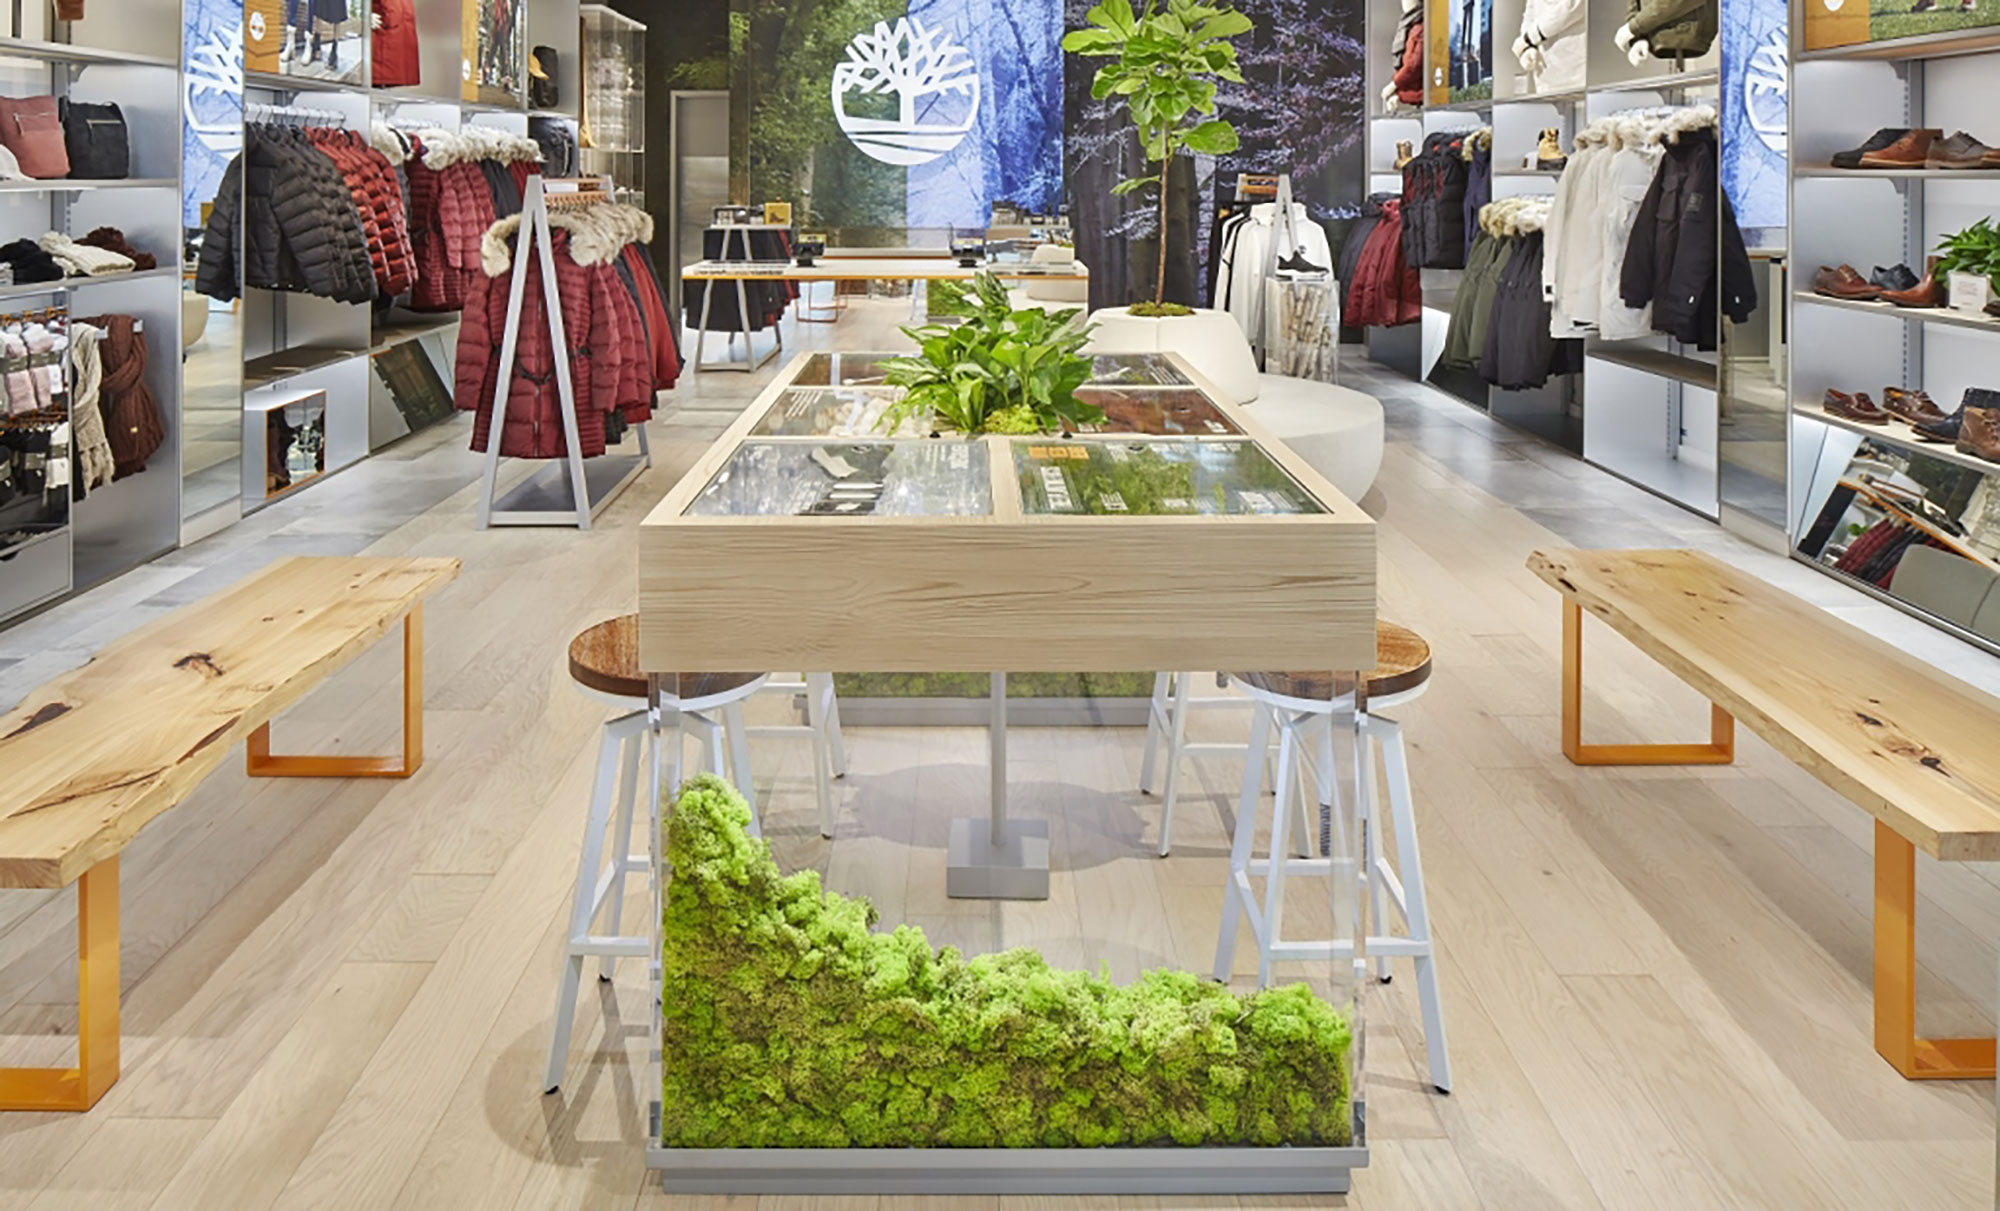 This is Planet Earth – Visual Merchandising and Store Design